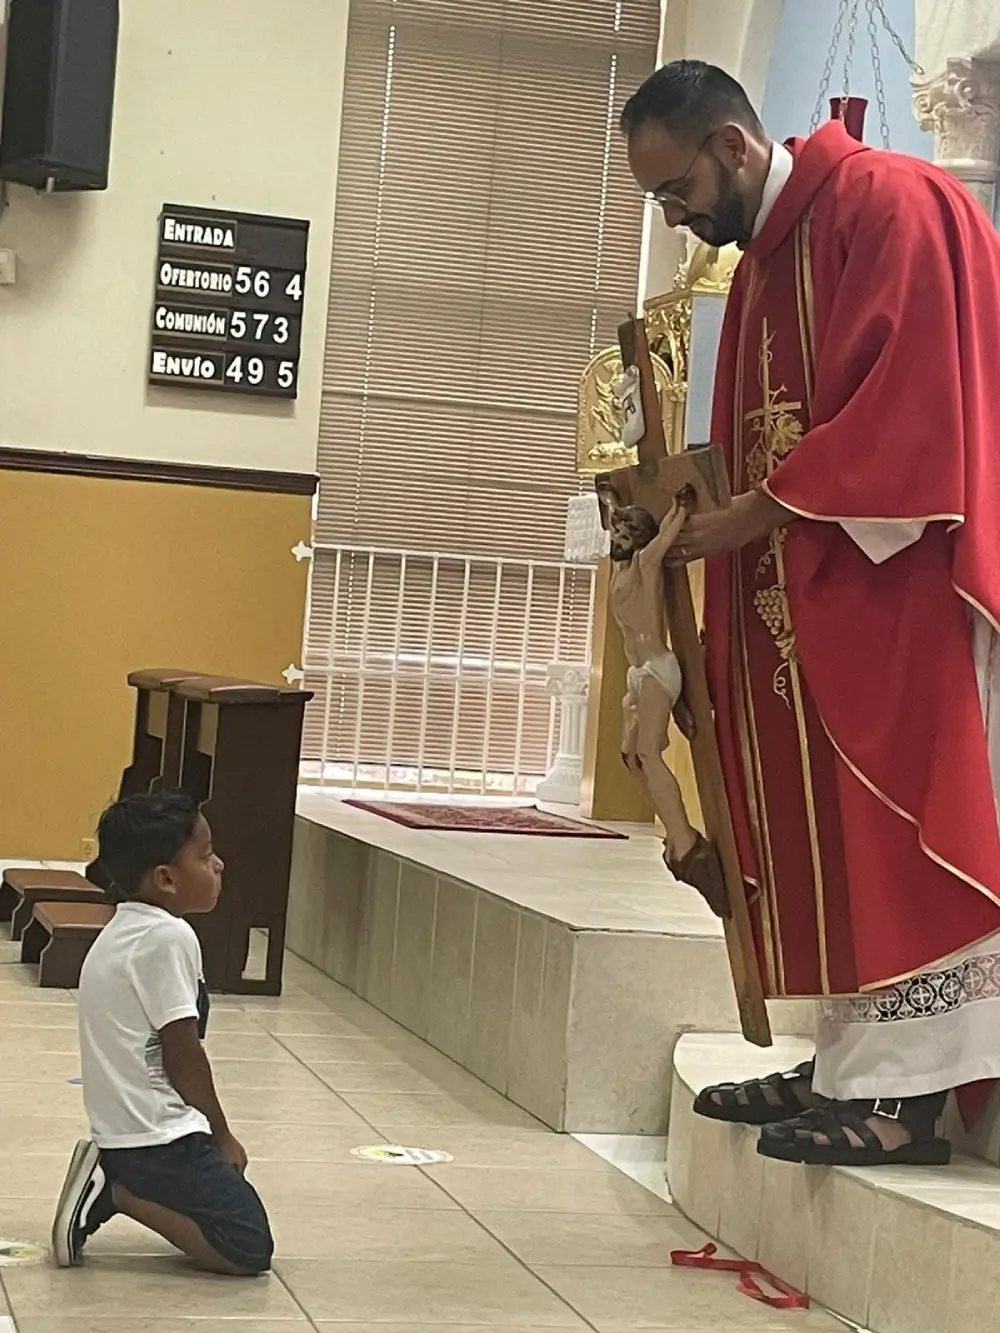 A priest holding a cross in front of a kneeling child